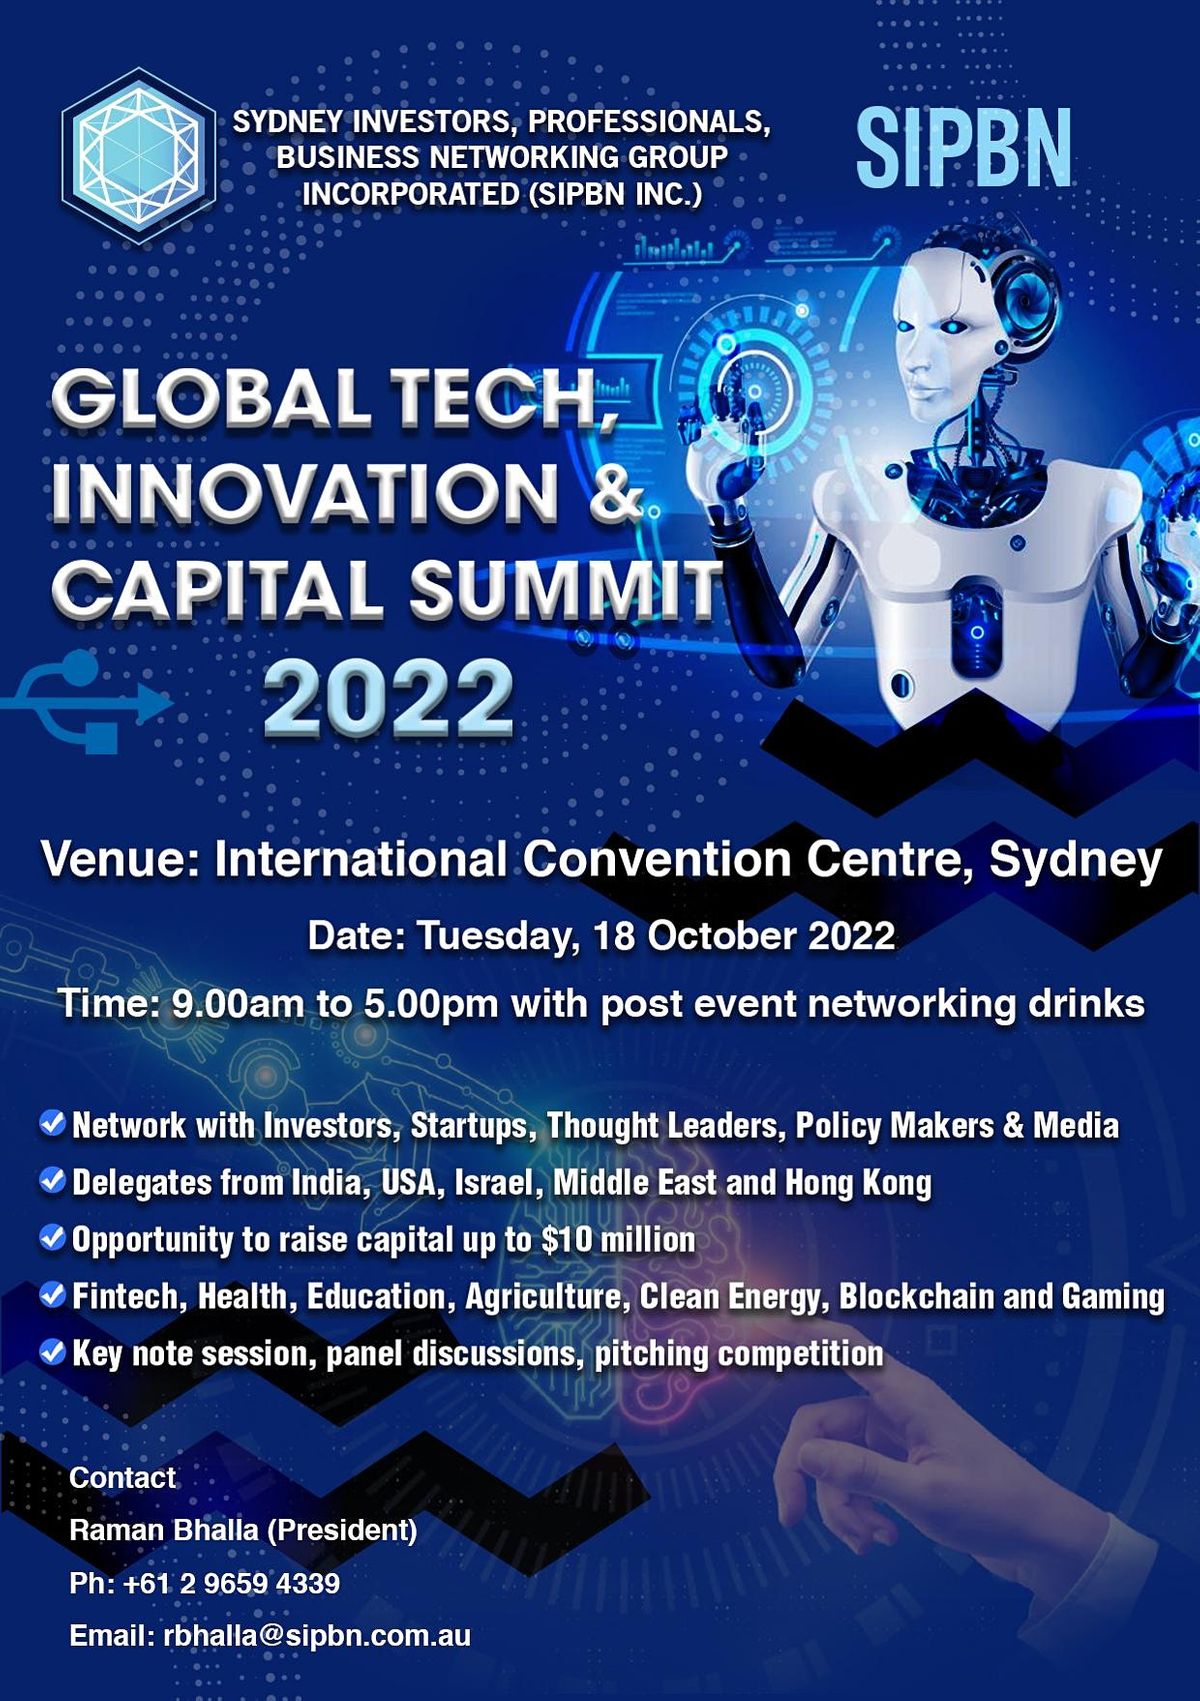 Global Tech, Innovation and Capital Summit 2022